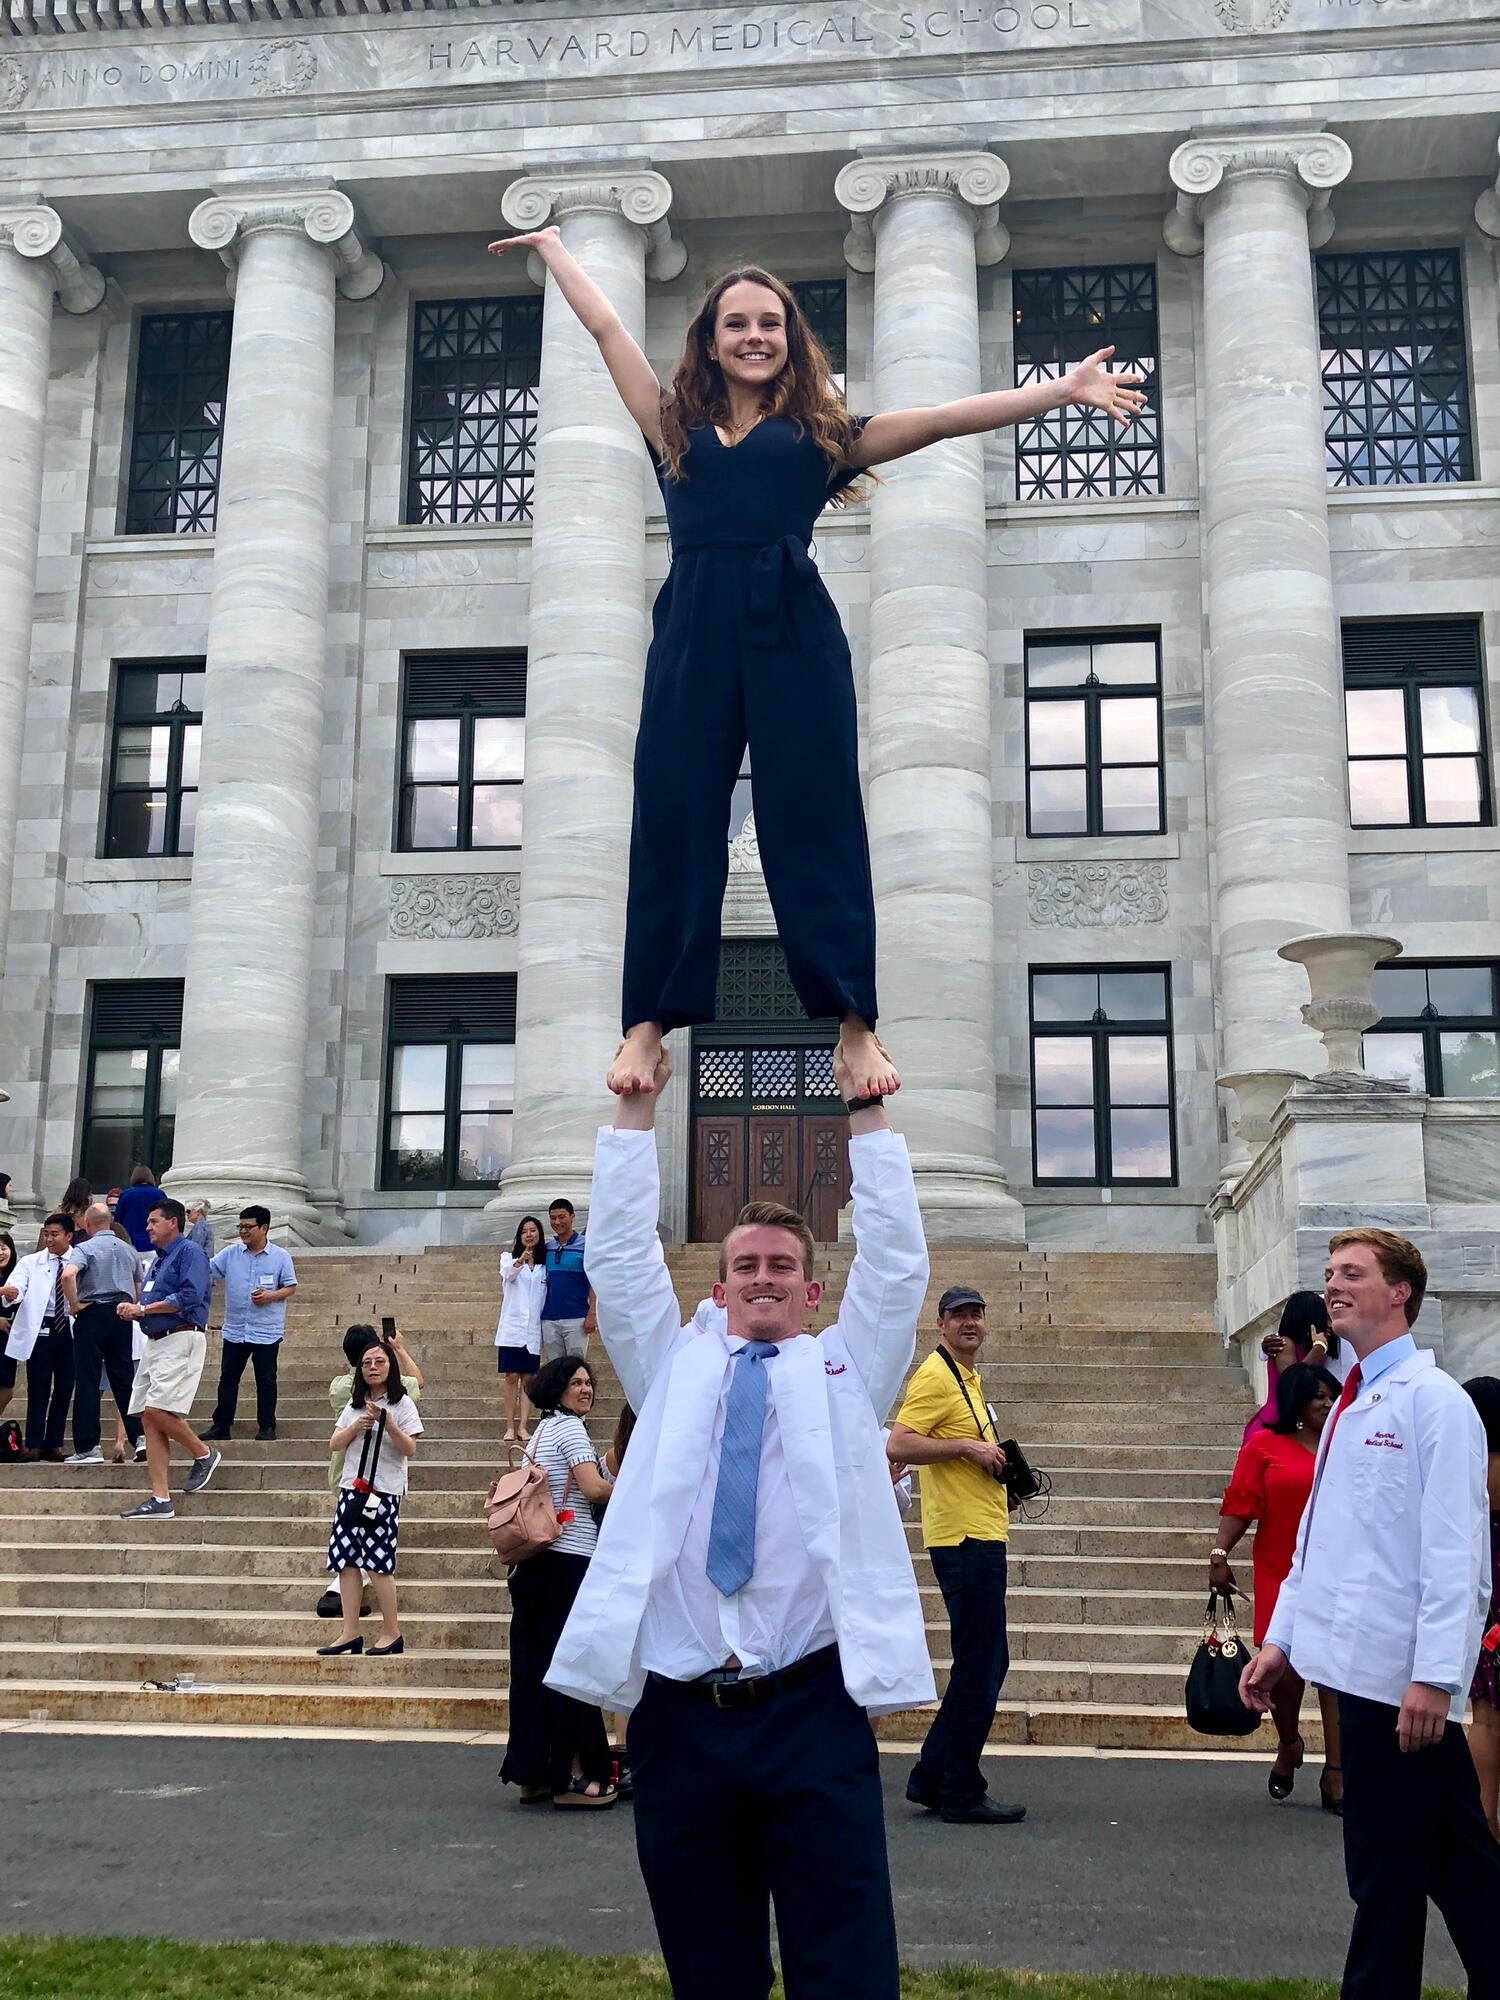 One person holding other person above their head, cheerleading